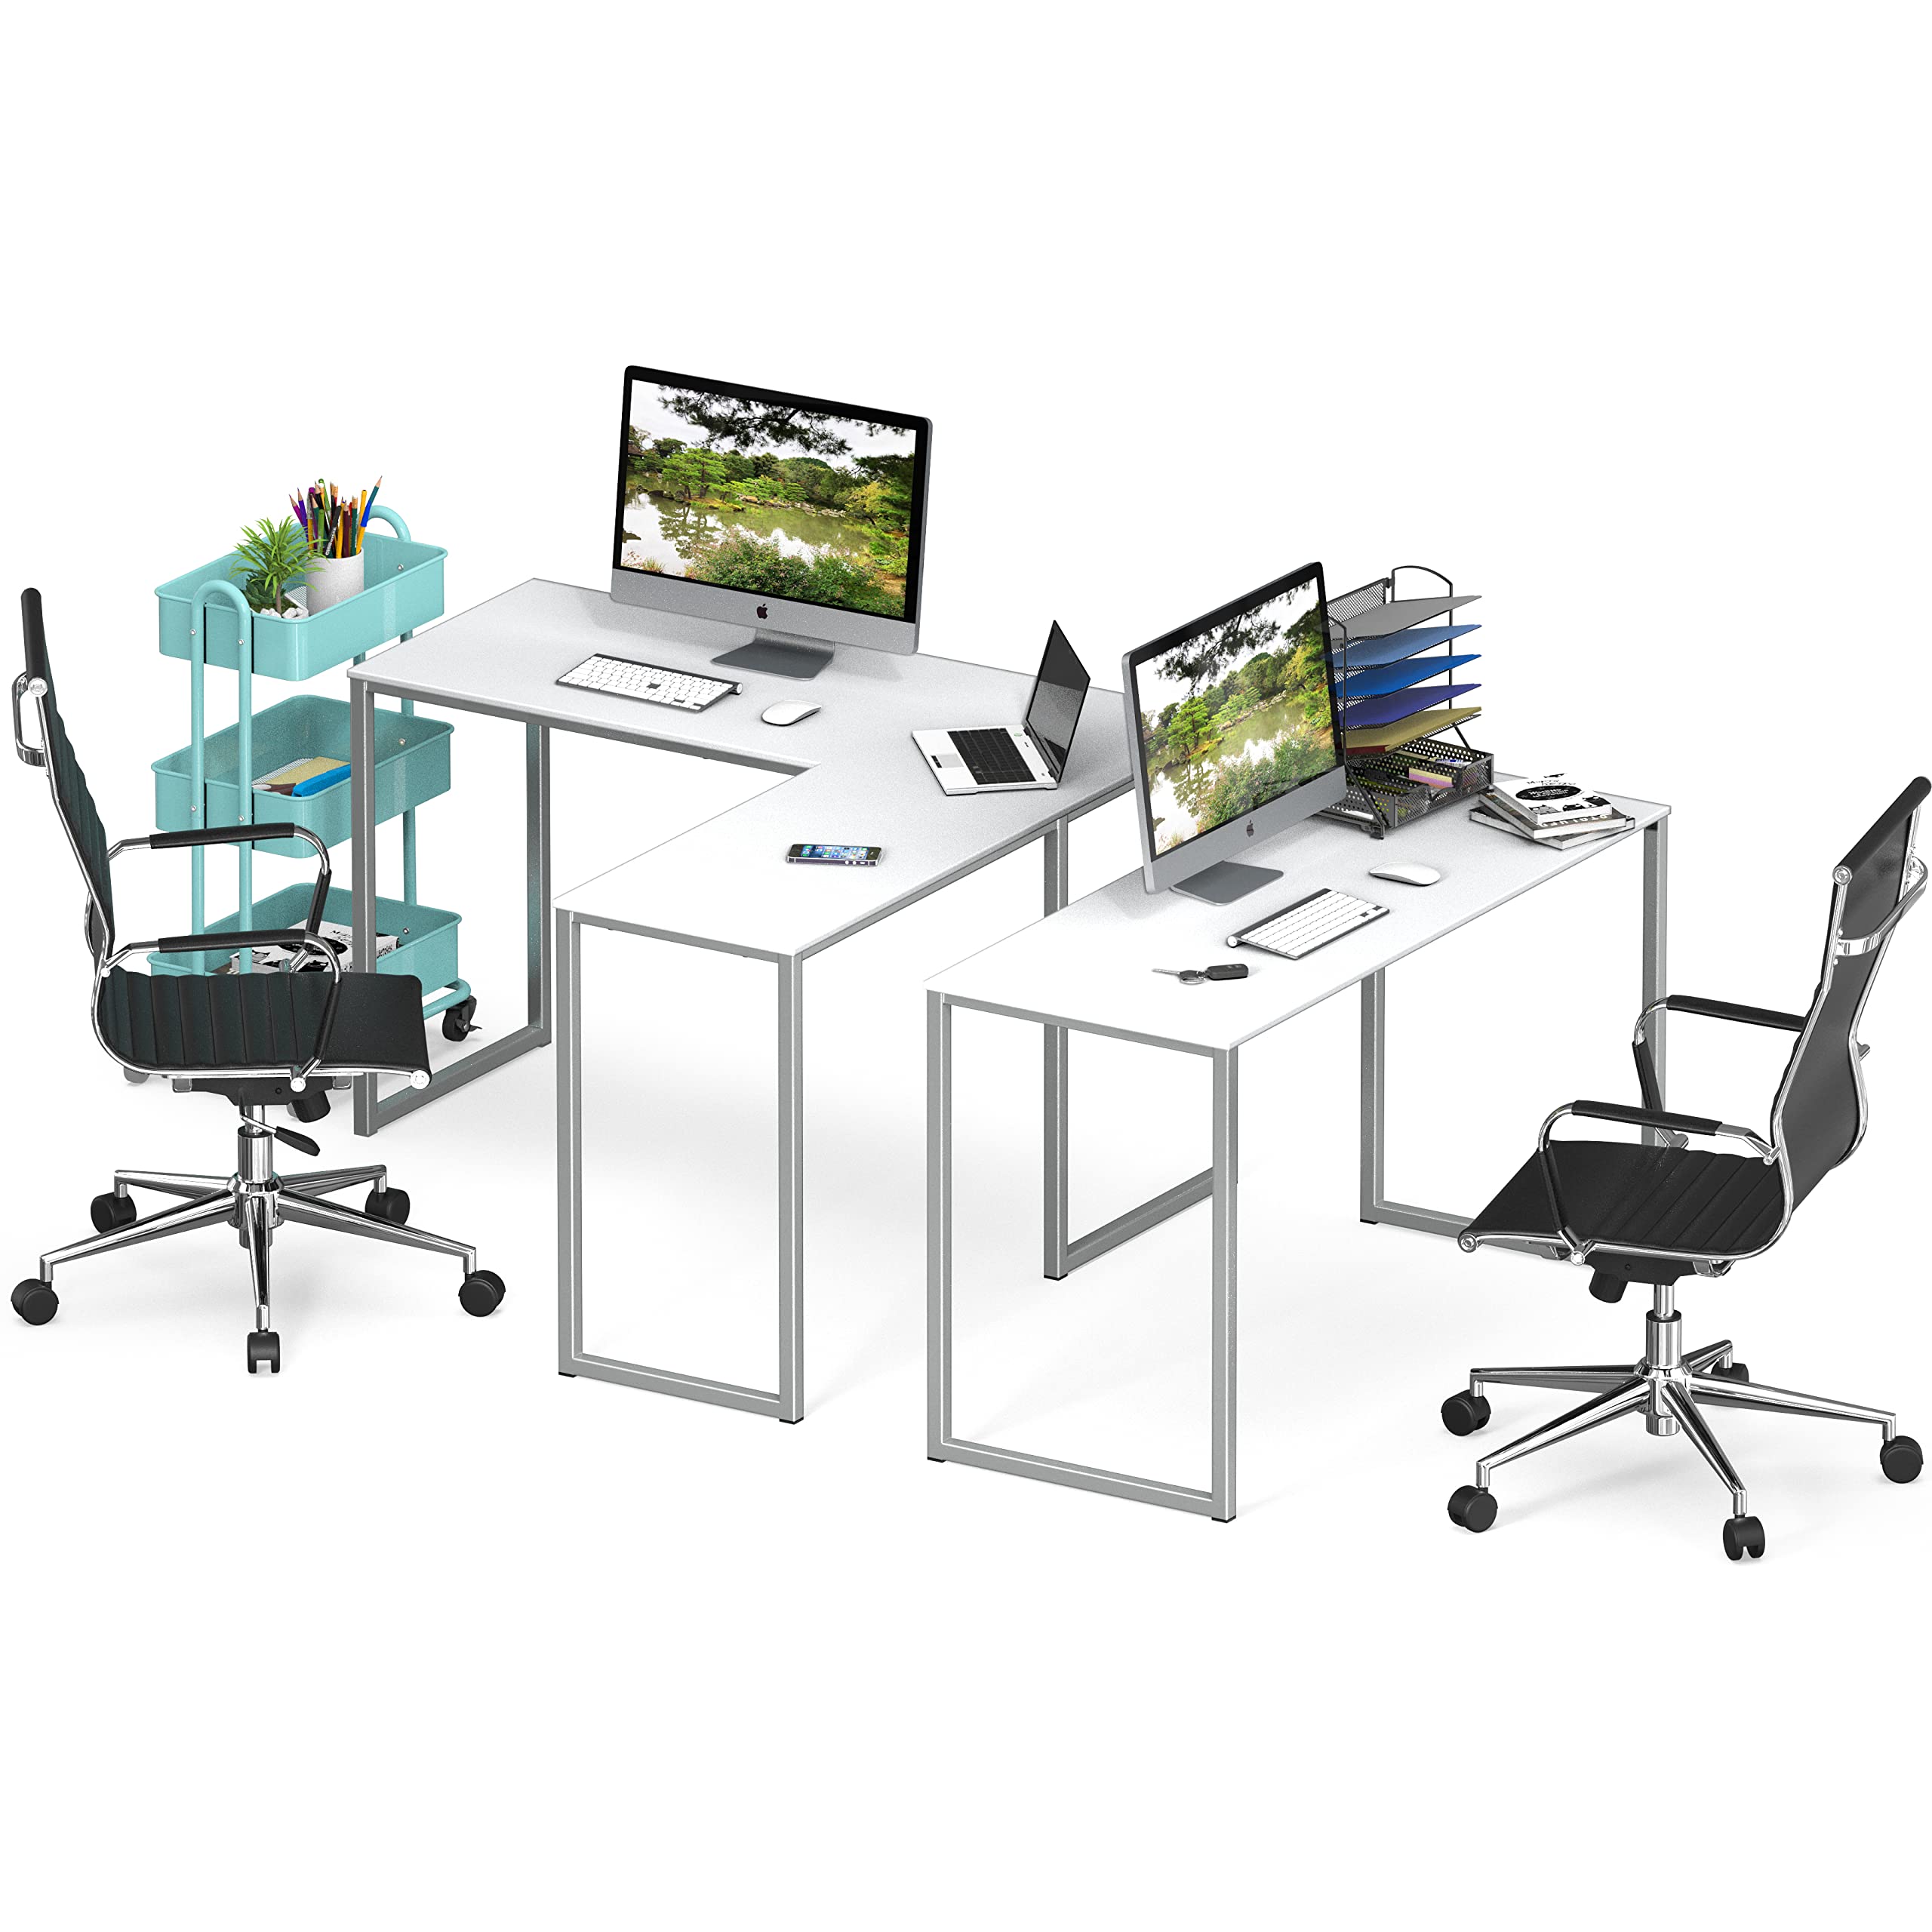 SHW 48-Inch Mission L-Shaped Home Computer desk, White - image 4 of 5